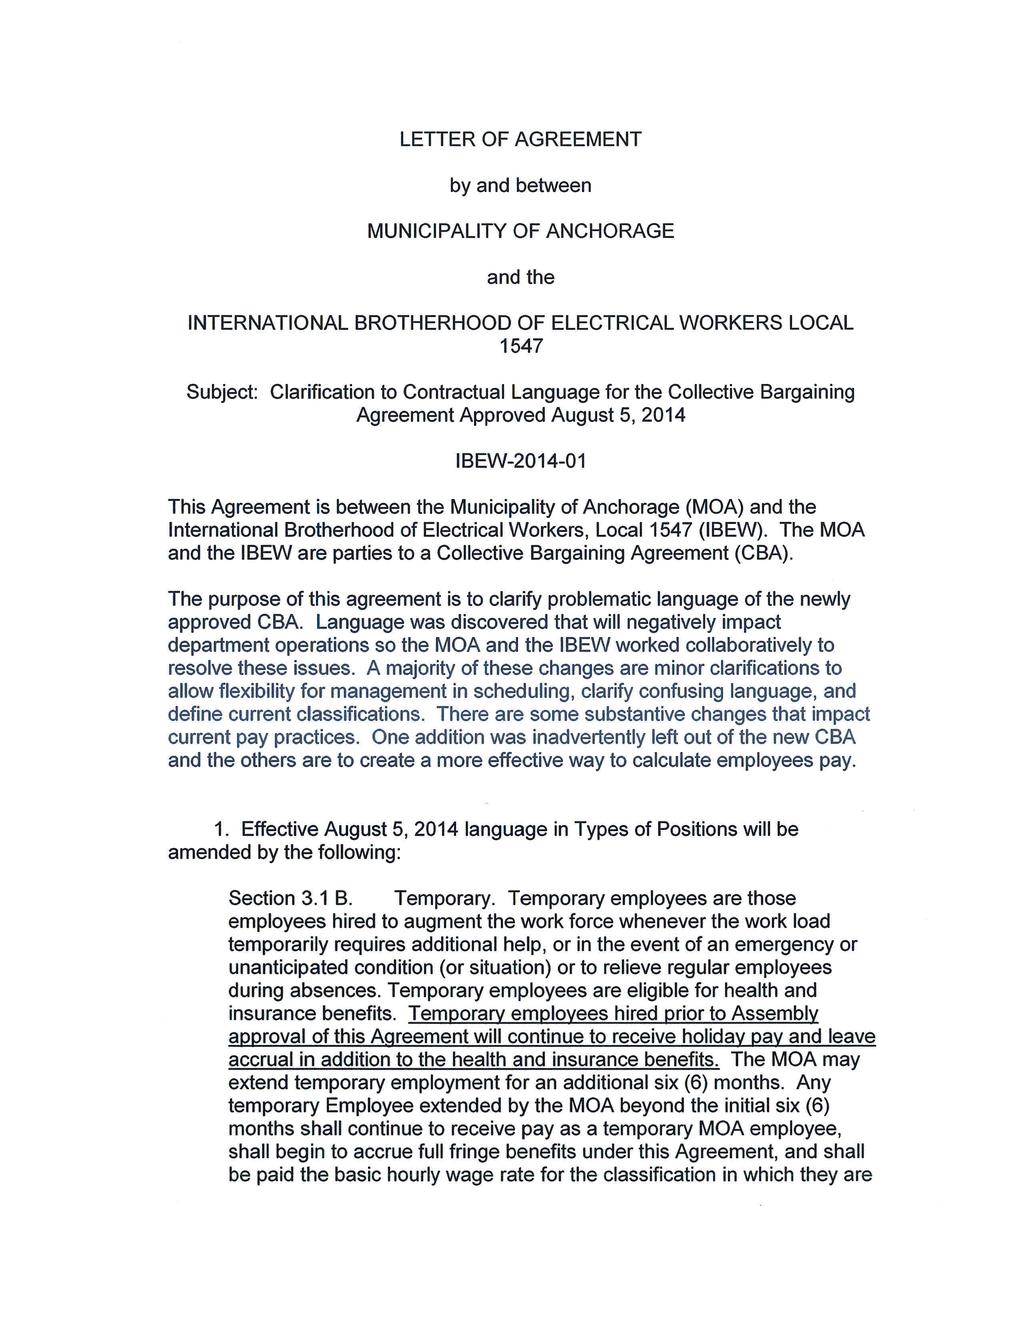 LETTER OF AGREEMENT by and between MUNICIPALITY OF ANCHORAGE and the INTERNATIONAL BROTHERHOOD OF ELECTRICAL WORKERS LOCAL 1547 Subject: Clarification to Contractual Language for the Collective